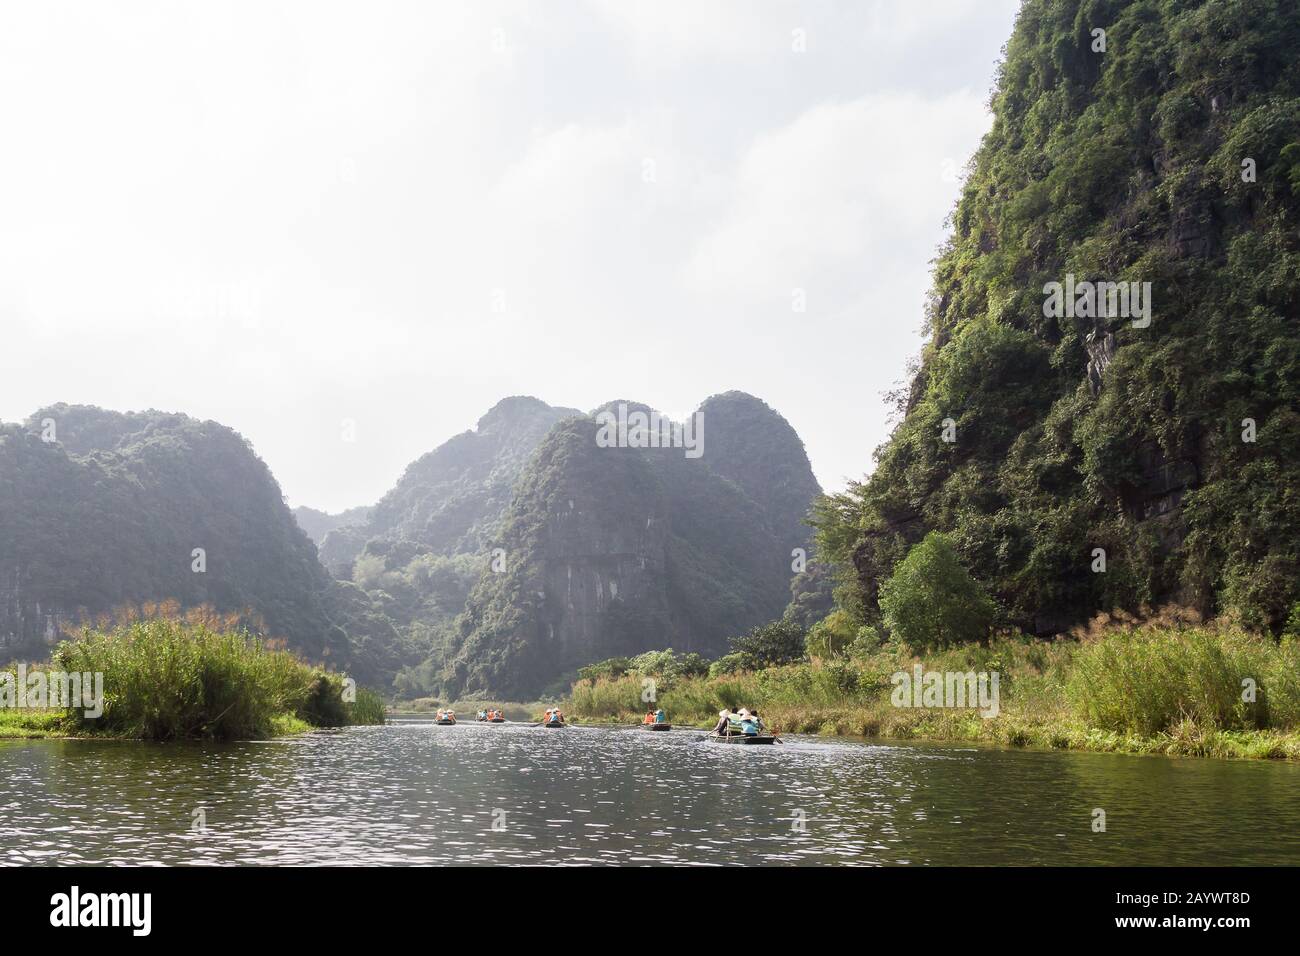 Vietnam Trang An Landscape - Limestone (karst) massifs of Trang An in the Red River Delta in Ninh Binh Province of North Vietnam, Southeast Asia. Stock Photo